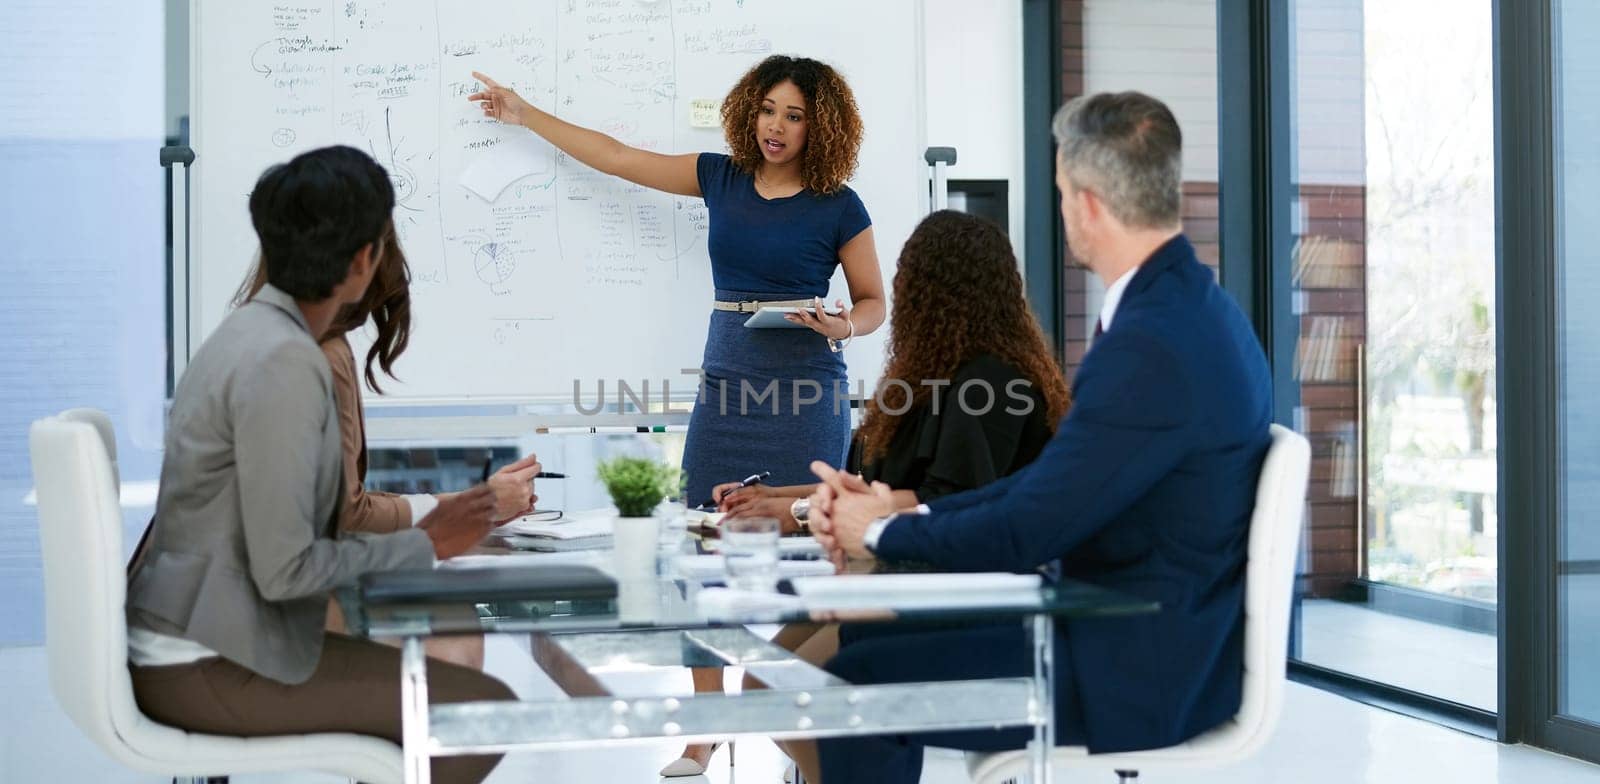 Its right there. a young businesswoman giving a presentation in the boardroom